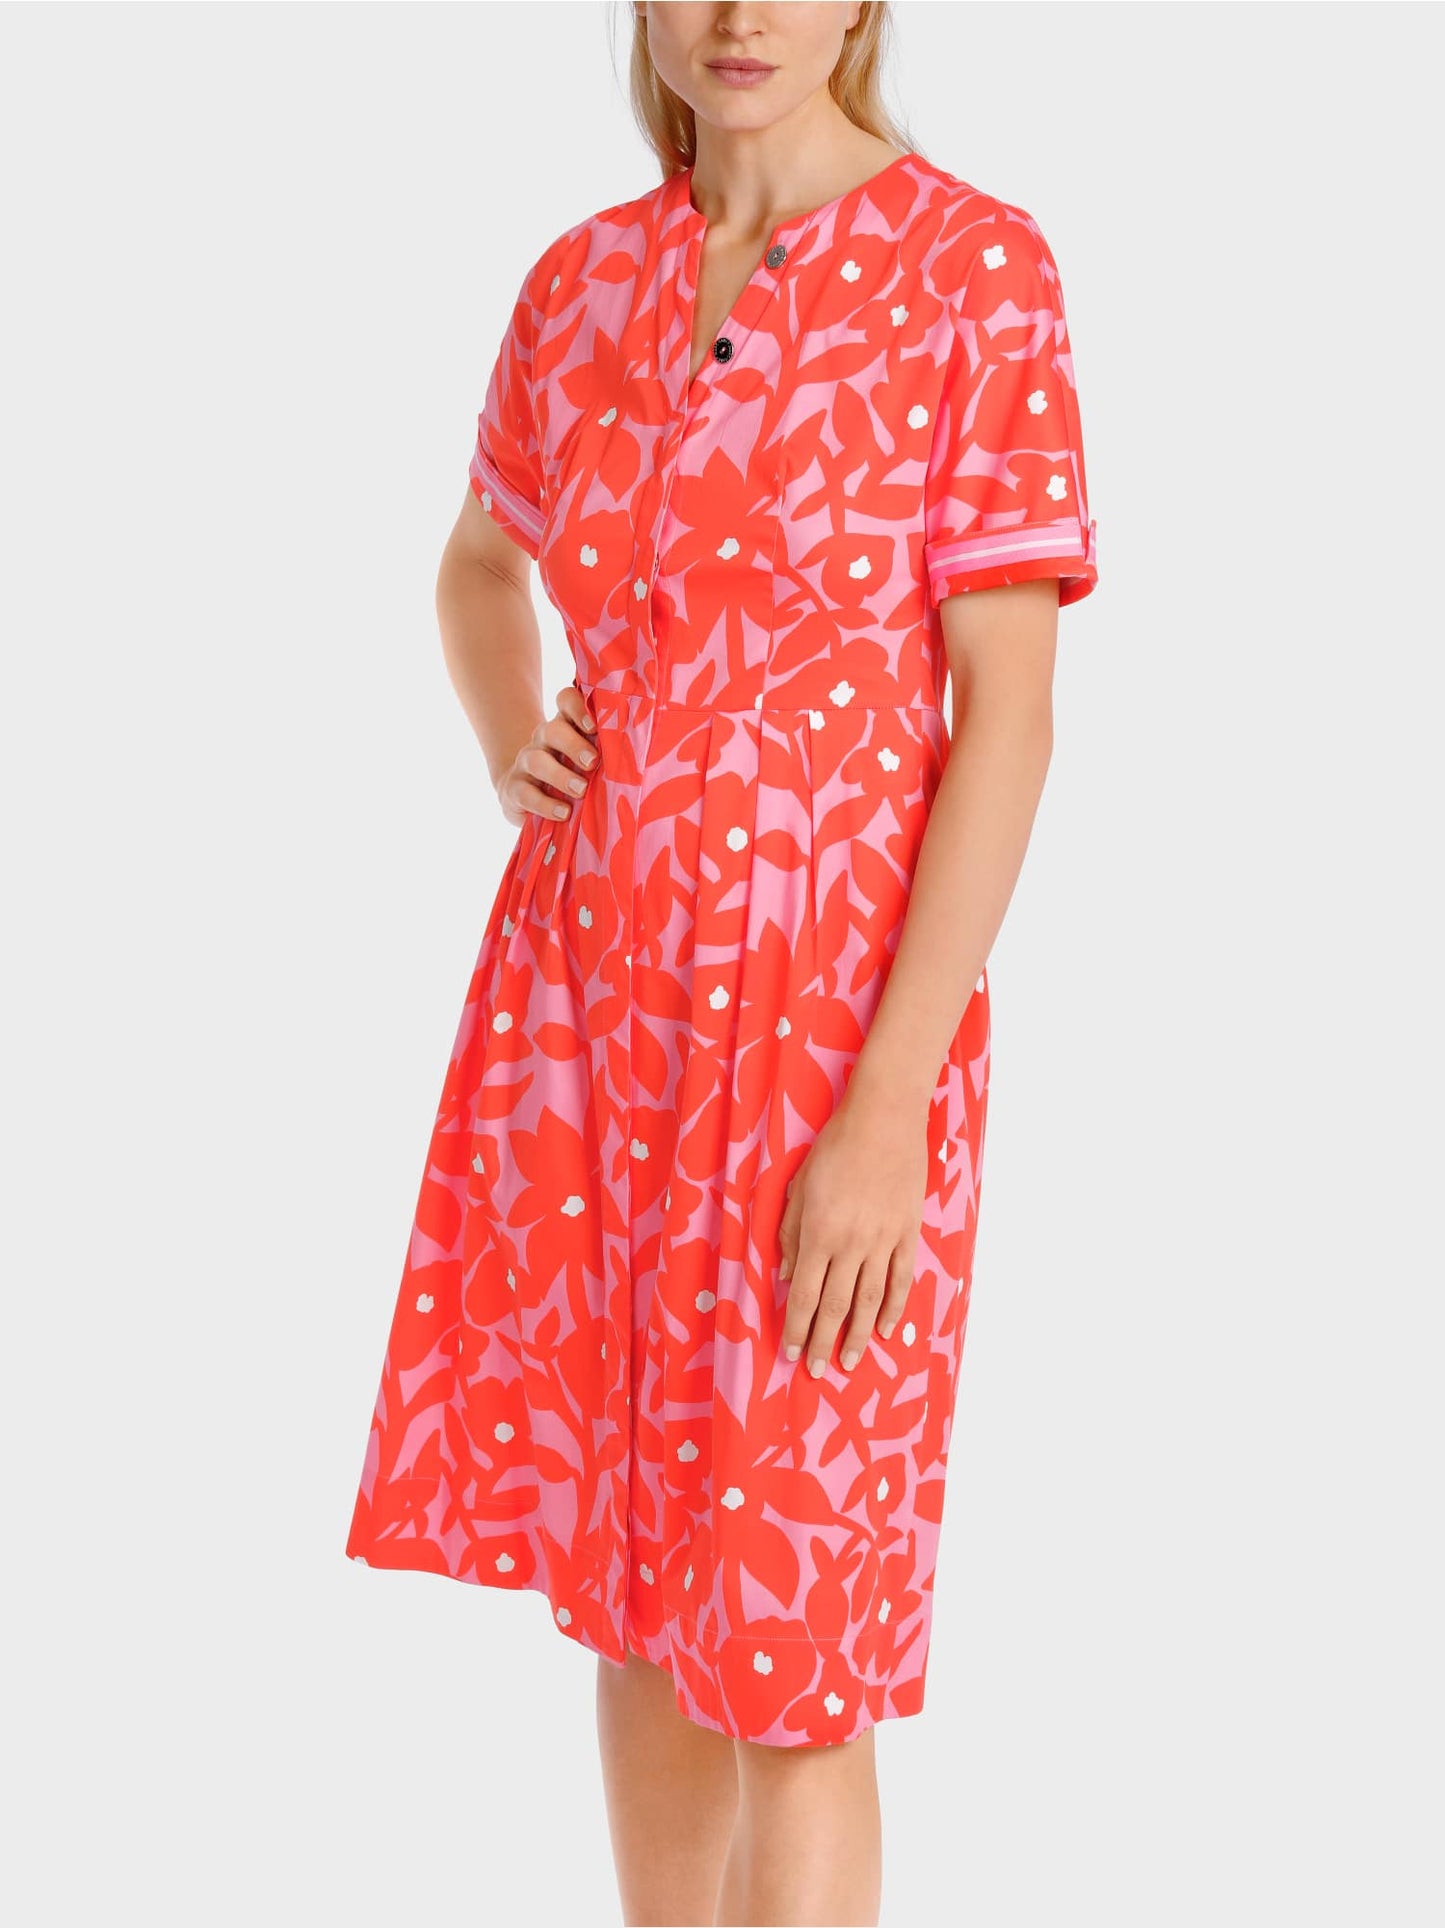 Fitted dress with kimono sleeves